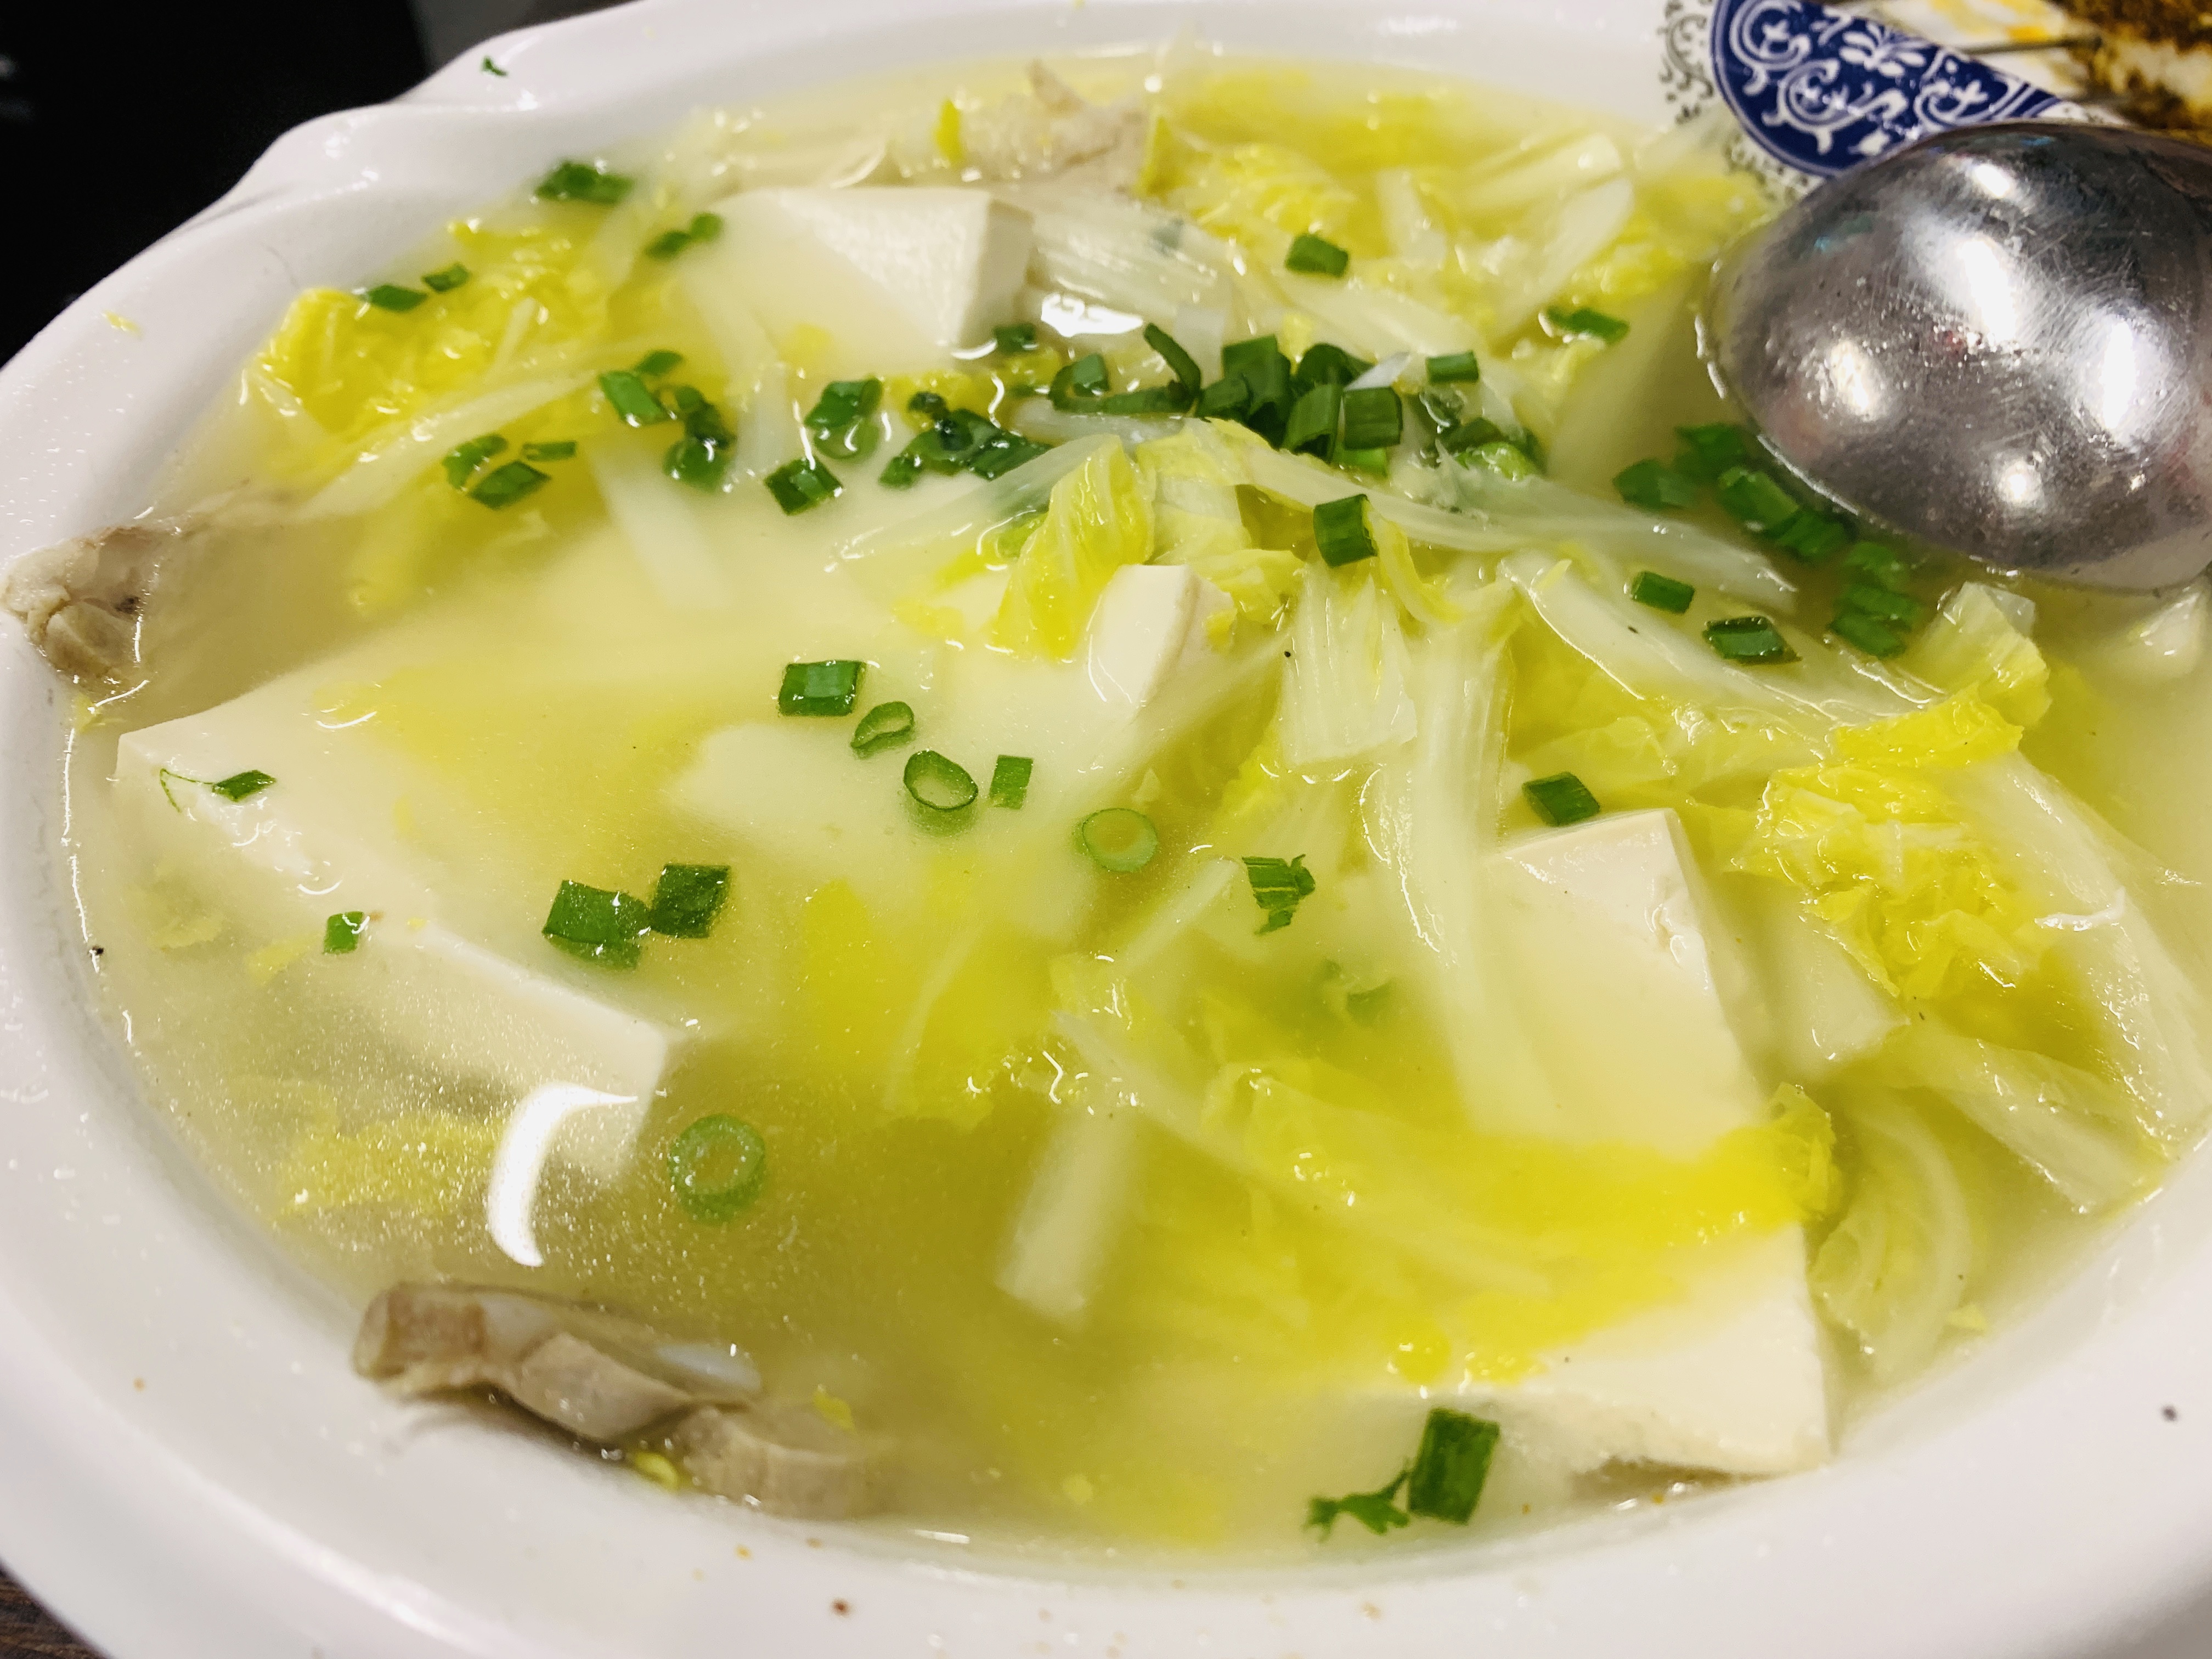 Xiao Yao Ge - Streaky Pork and Cabbage Soup